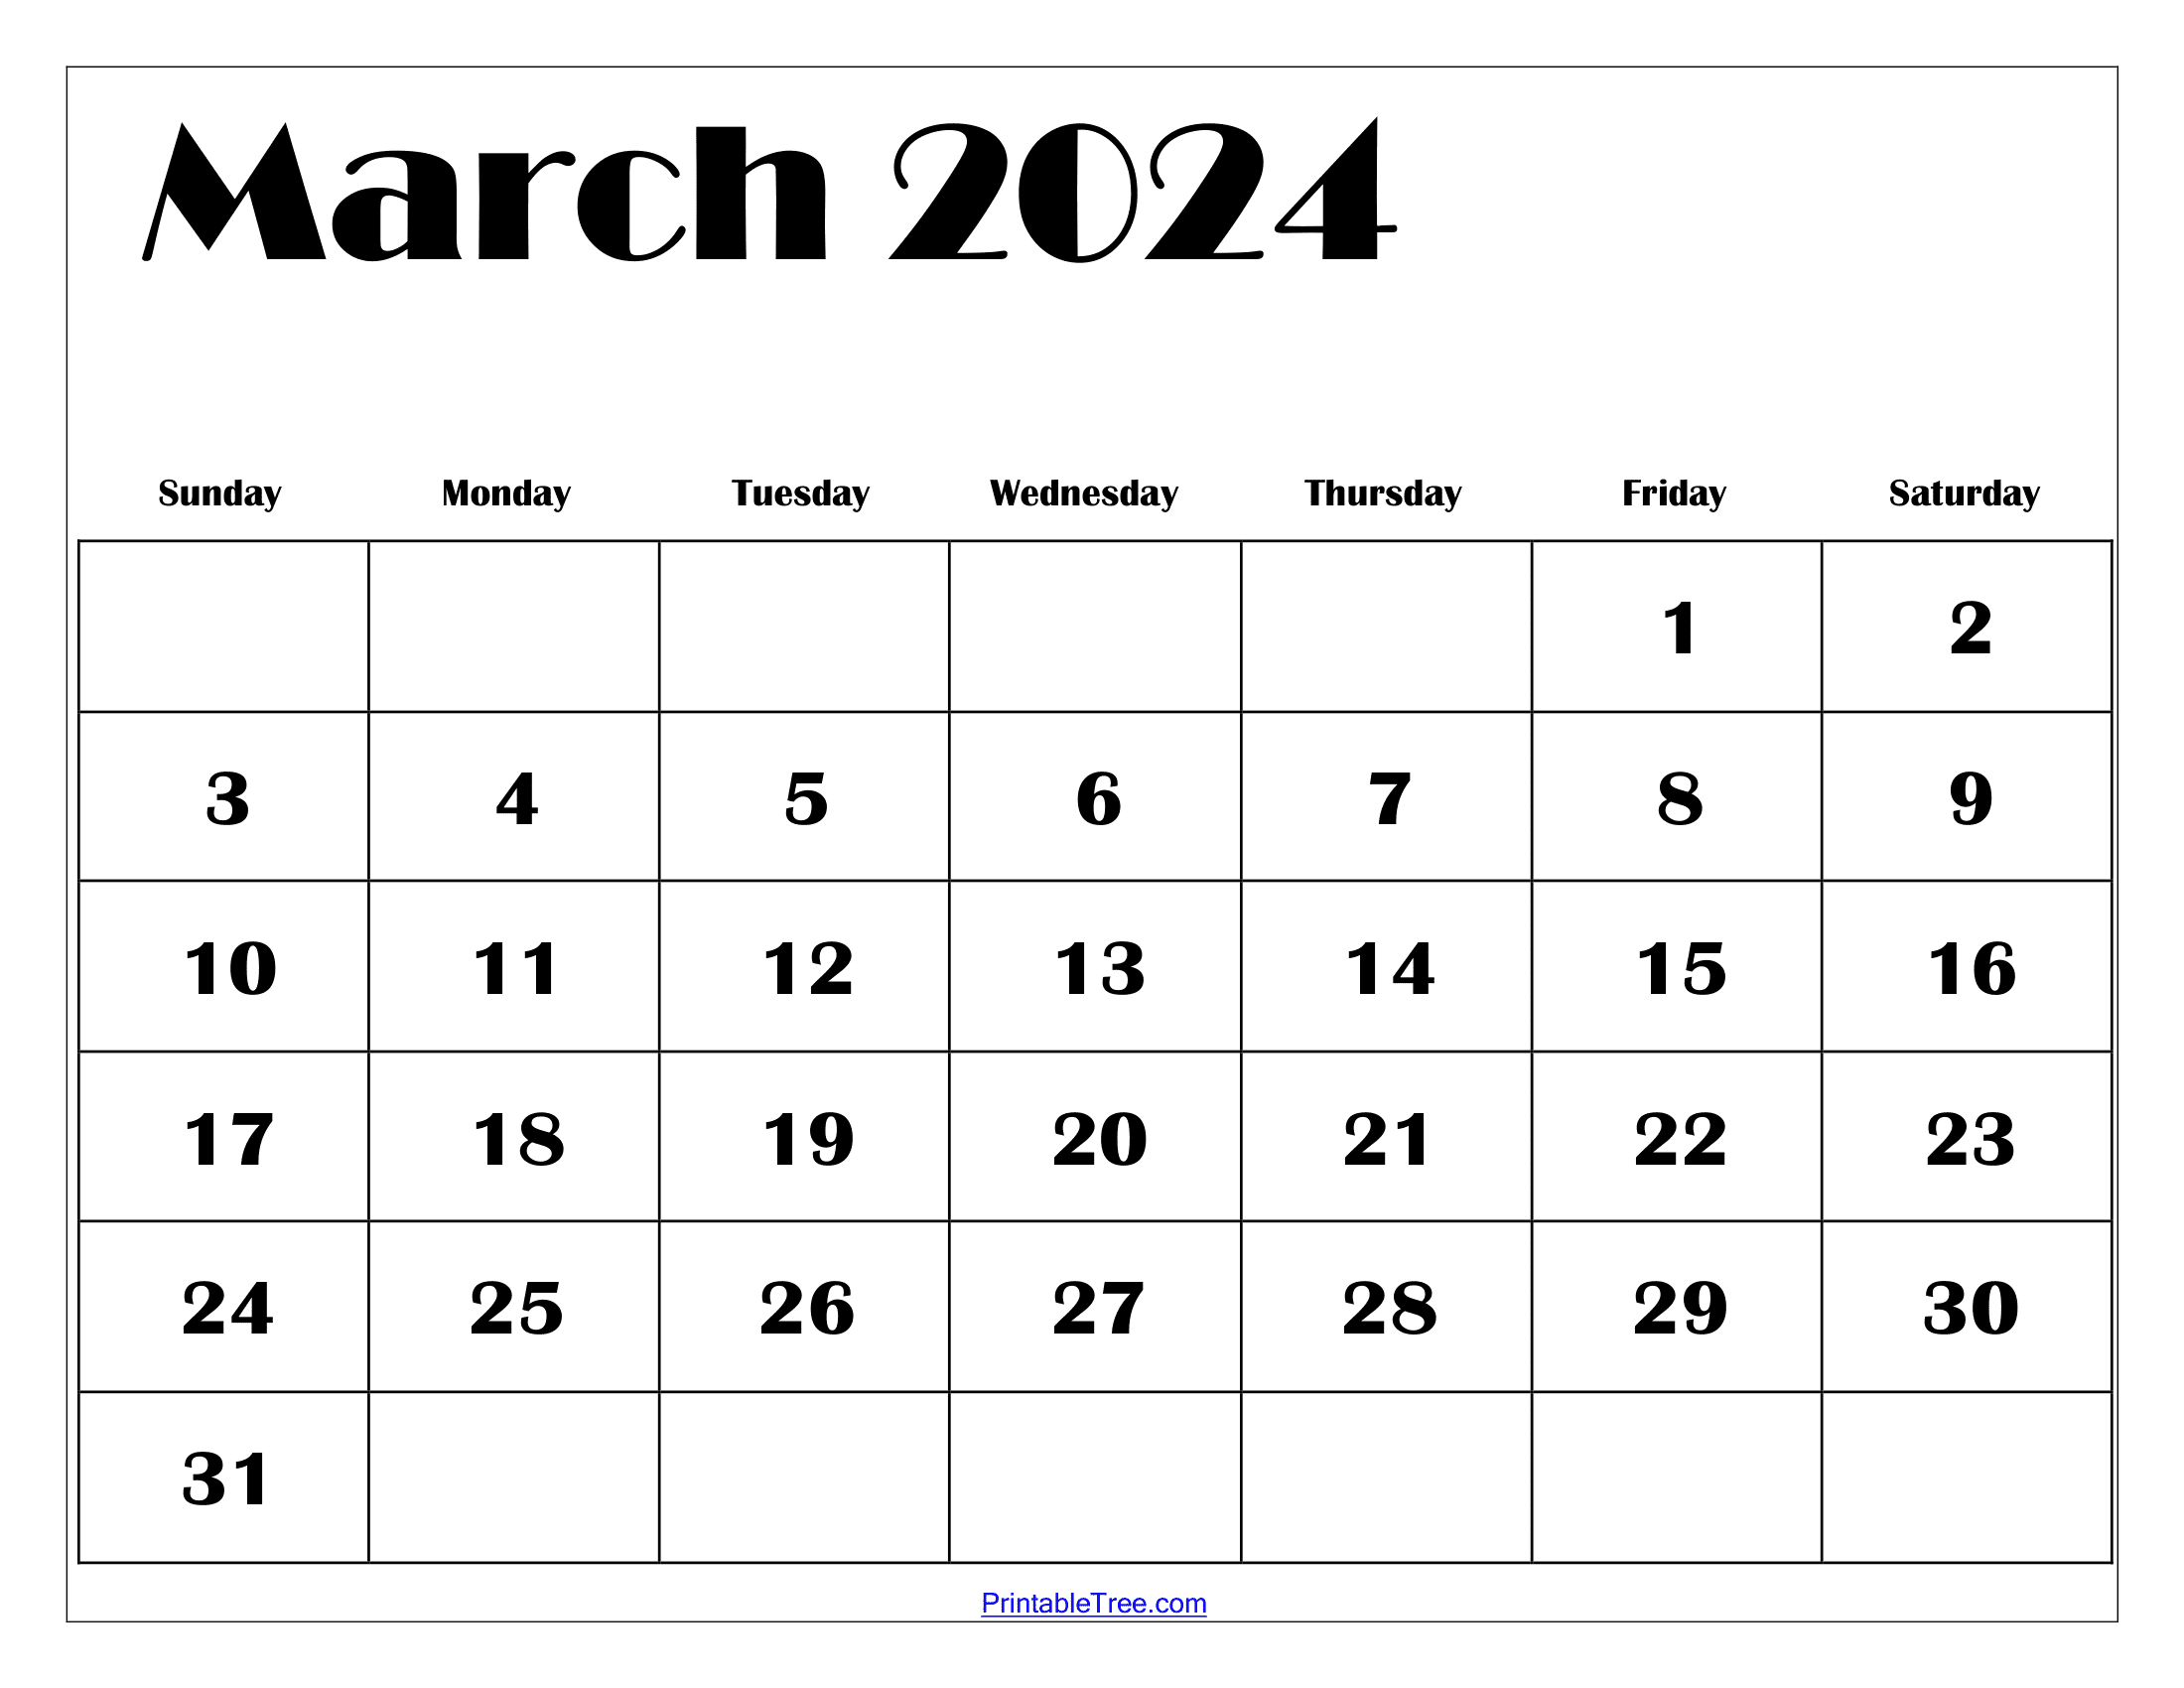 March 2024 Calendar Printable Pdf With Holidays Template Free for March Free Printable Calendar 2024